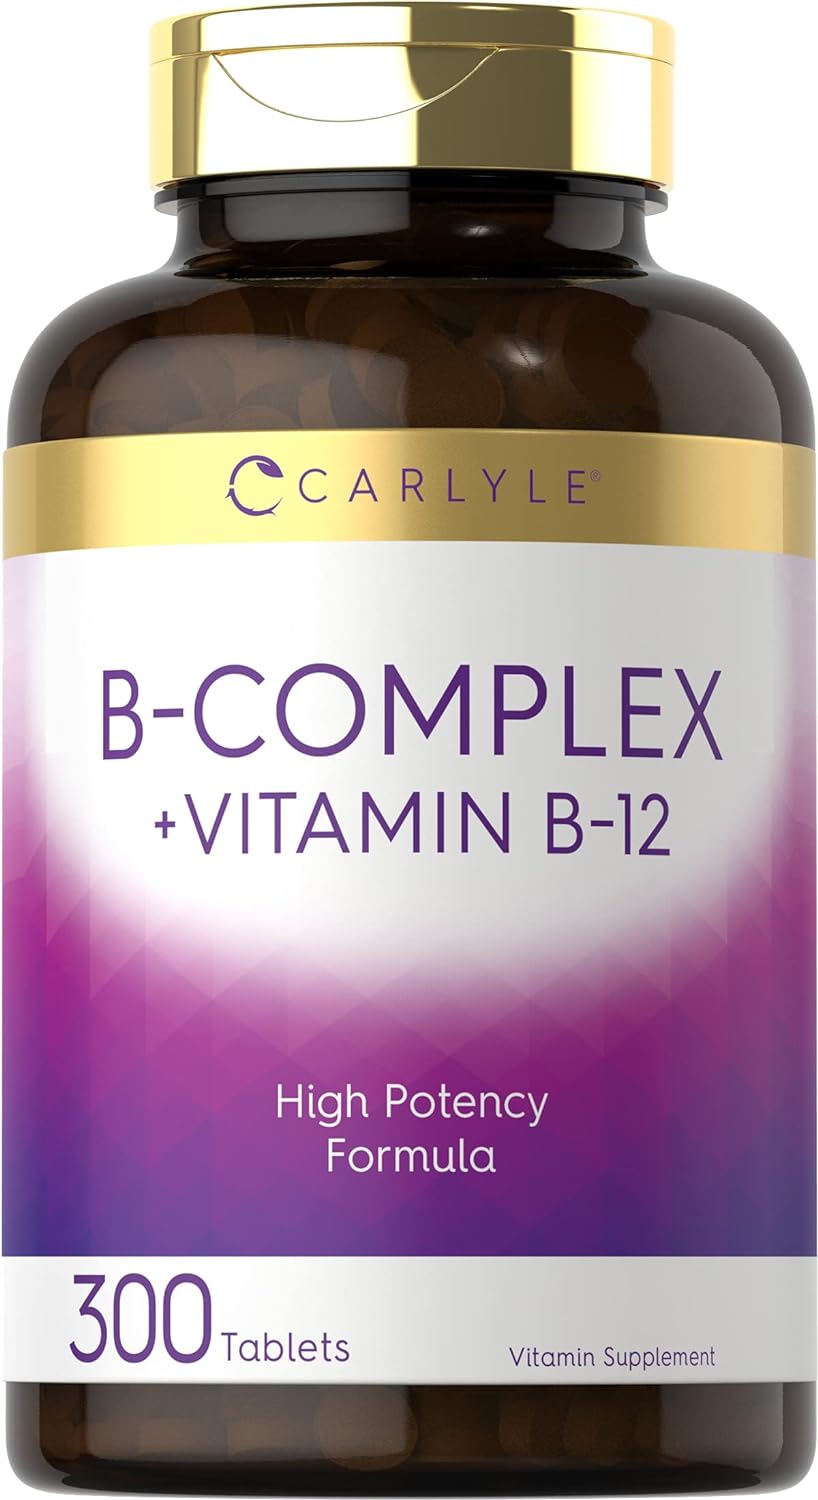 Carlyle B Complex Vitamin with B12 | 300 Tablets | High Potency Formula | Vegetarian and Non-GMO Supplement